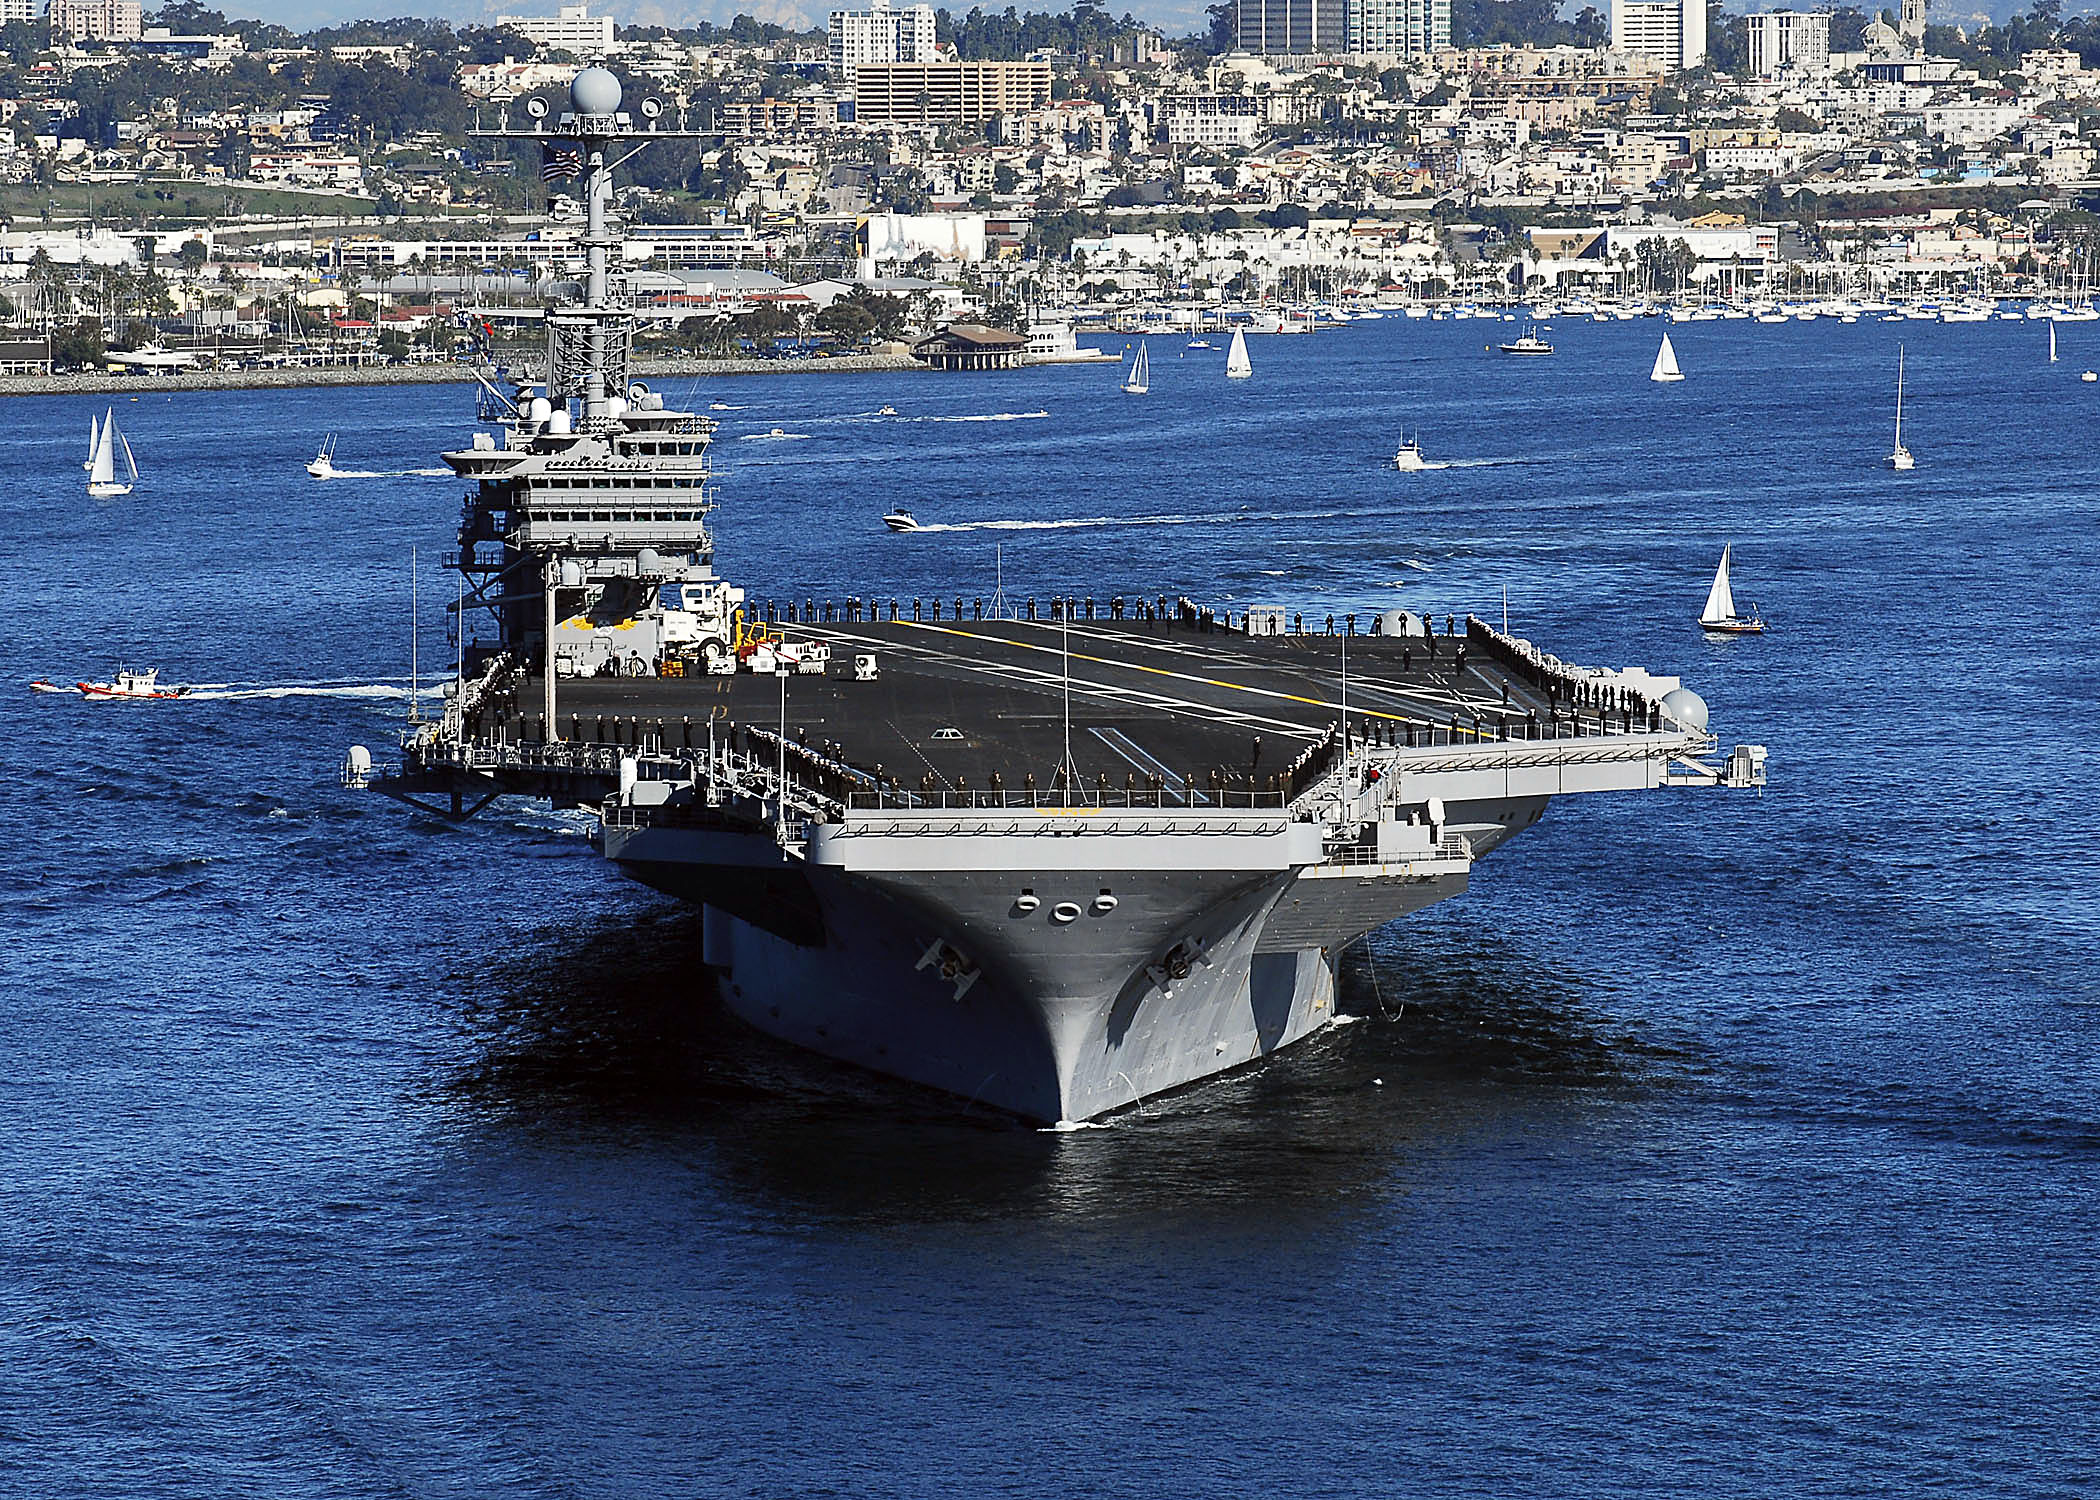 US_Navy_090117-N-2610F-329_The_aircraft_carrier_USS_John_C._Stennis_(CVN_74)_departs_Naval_Air_Station_North_Island_in_San_Diego_after_embarking_personnel_assigned_to_Carrier_Air_Wing_(CVW)_9.jpg